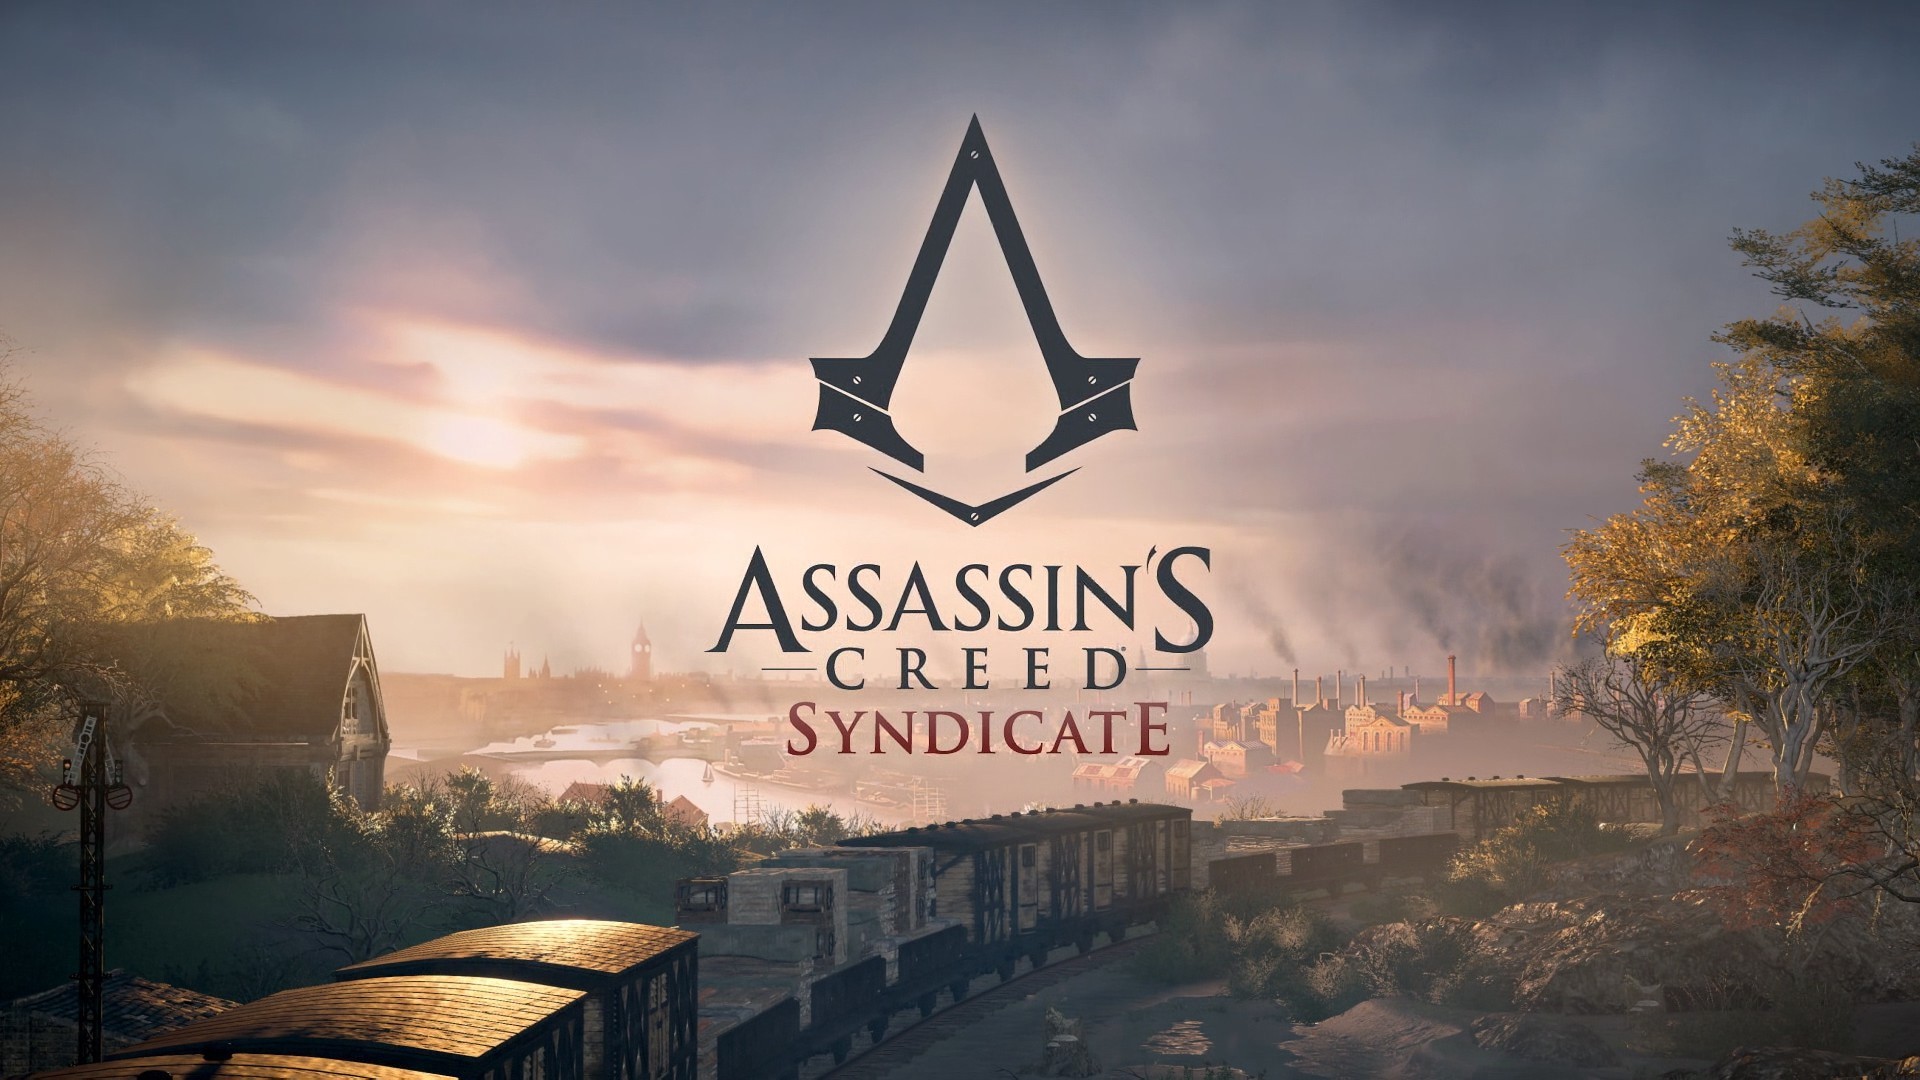 Assassins Creed Assassins Creed Syndicate Video Games 1920x1080